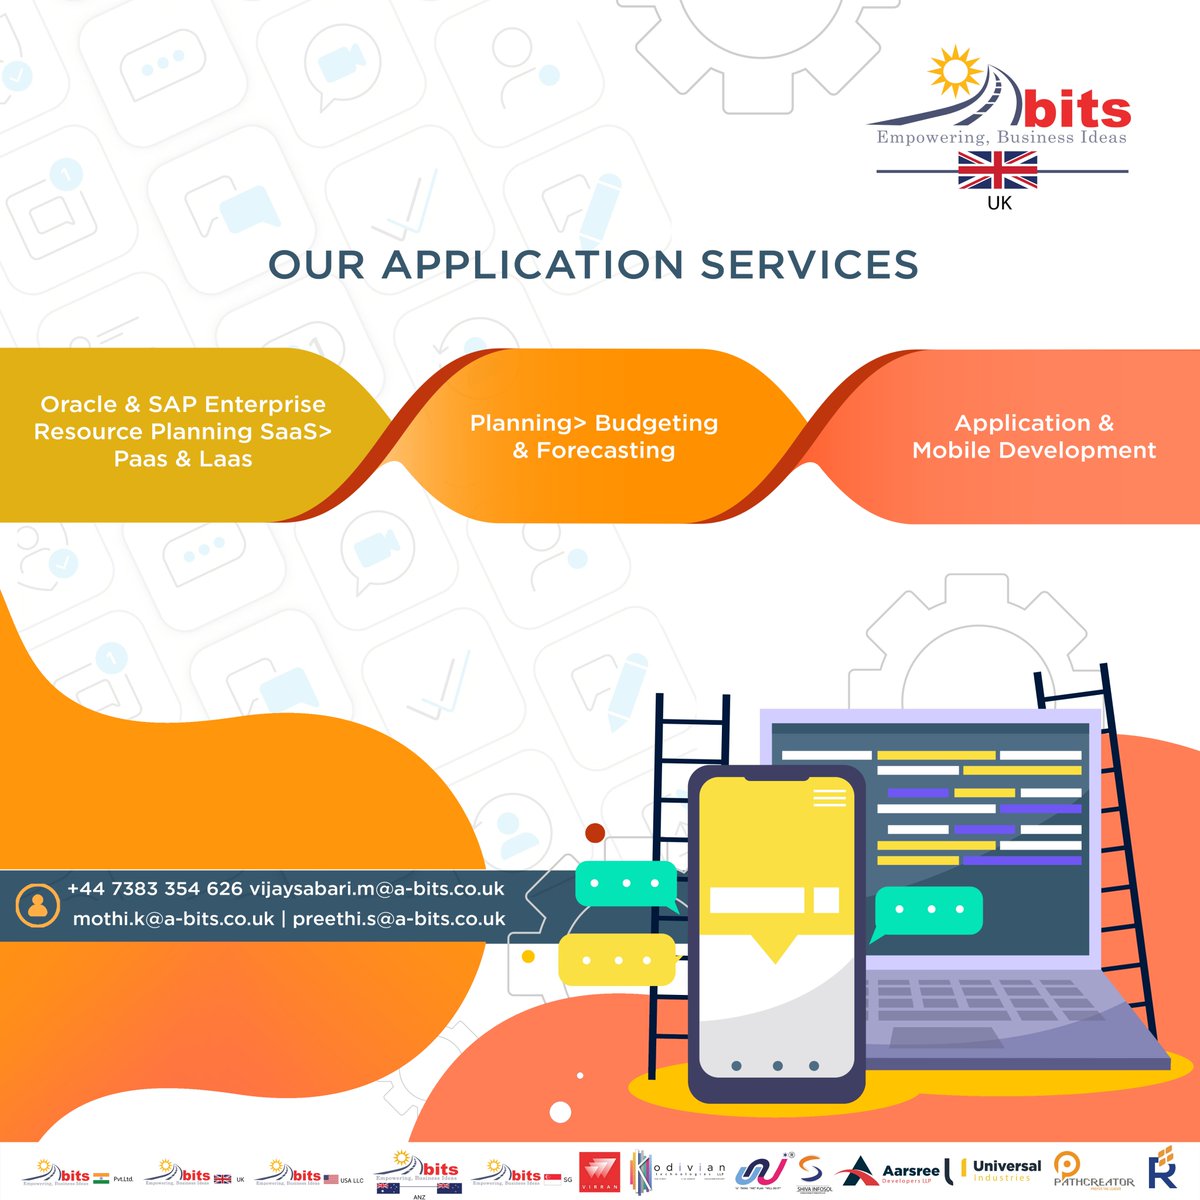 Our Application Services
#abitsuk #abits #ssgroupofcompanies #ssgroup #oracle #sap #saas #paas #laas #planning #budgeting #forecasting #applicationdevelopment #mobiledevelopment